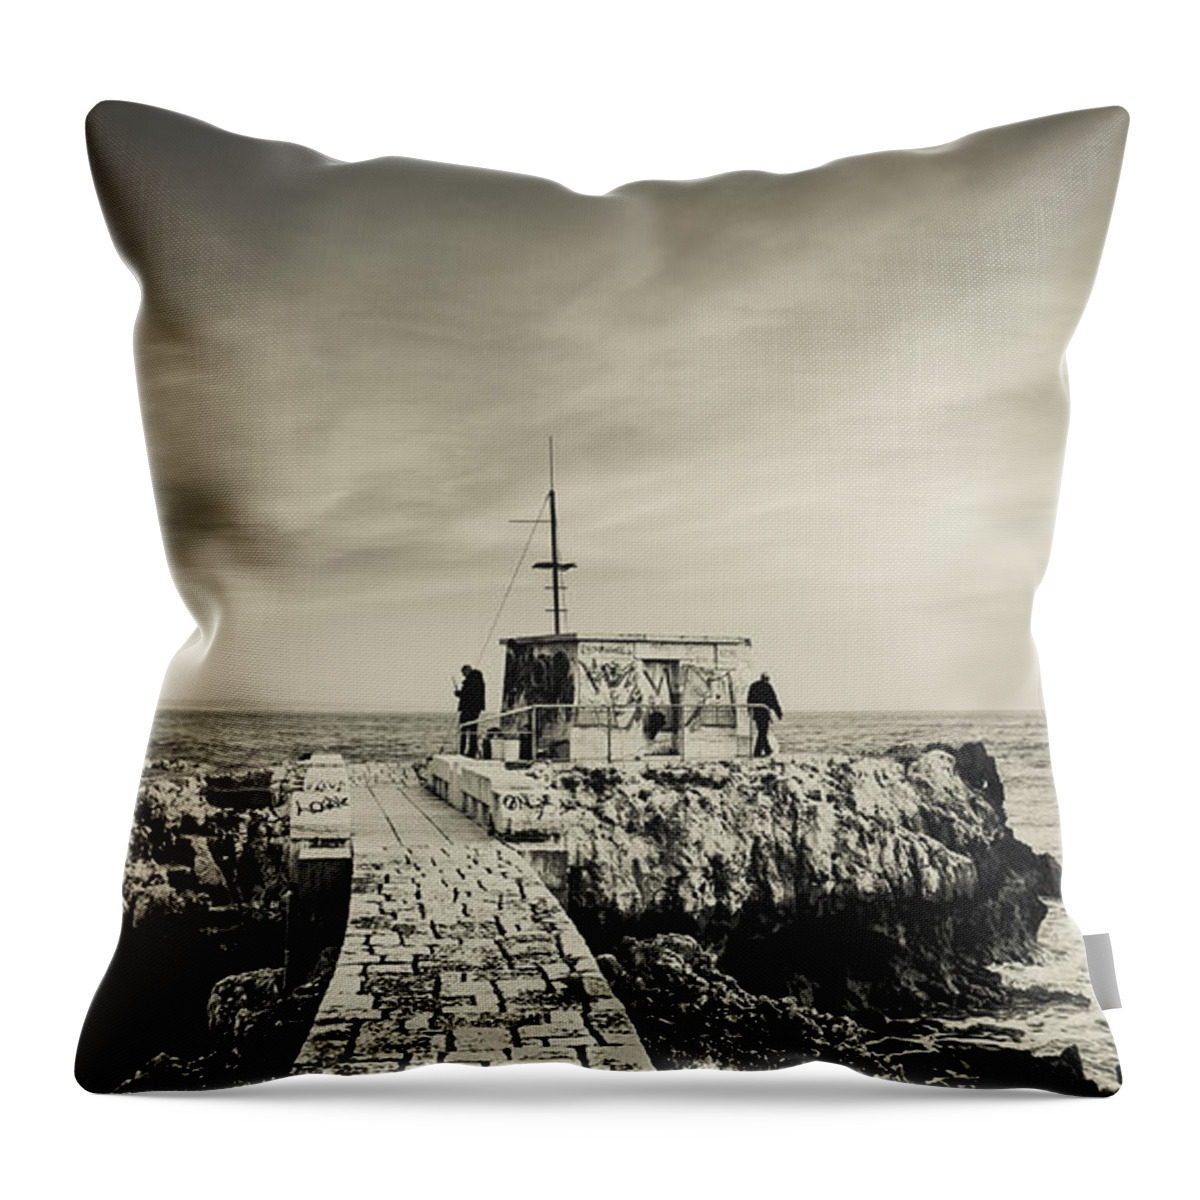 Fisherman Throw Pillow featuring the photograph The Fishermen's Hut by Marco Oliveira